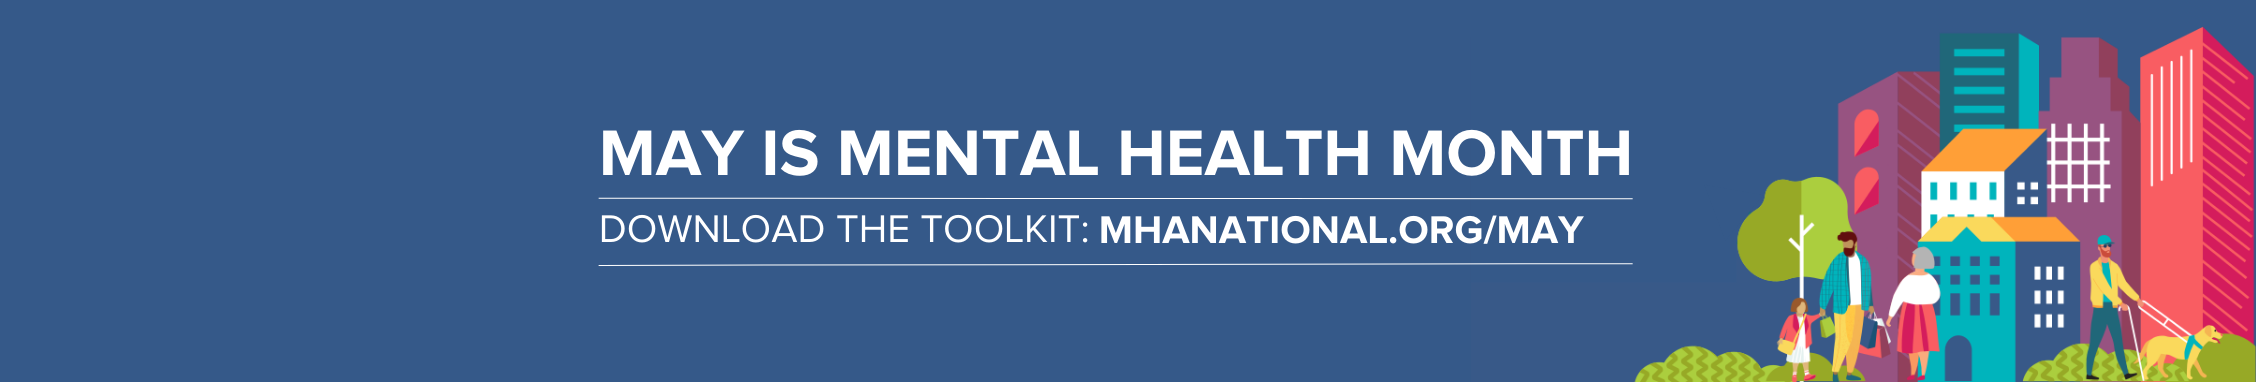 May is Mental Health Month | Download the toolkit:mhanational.org/may